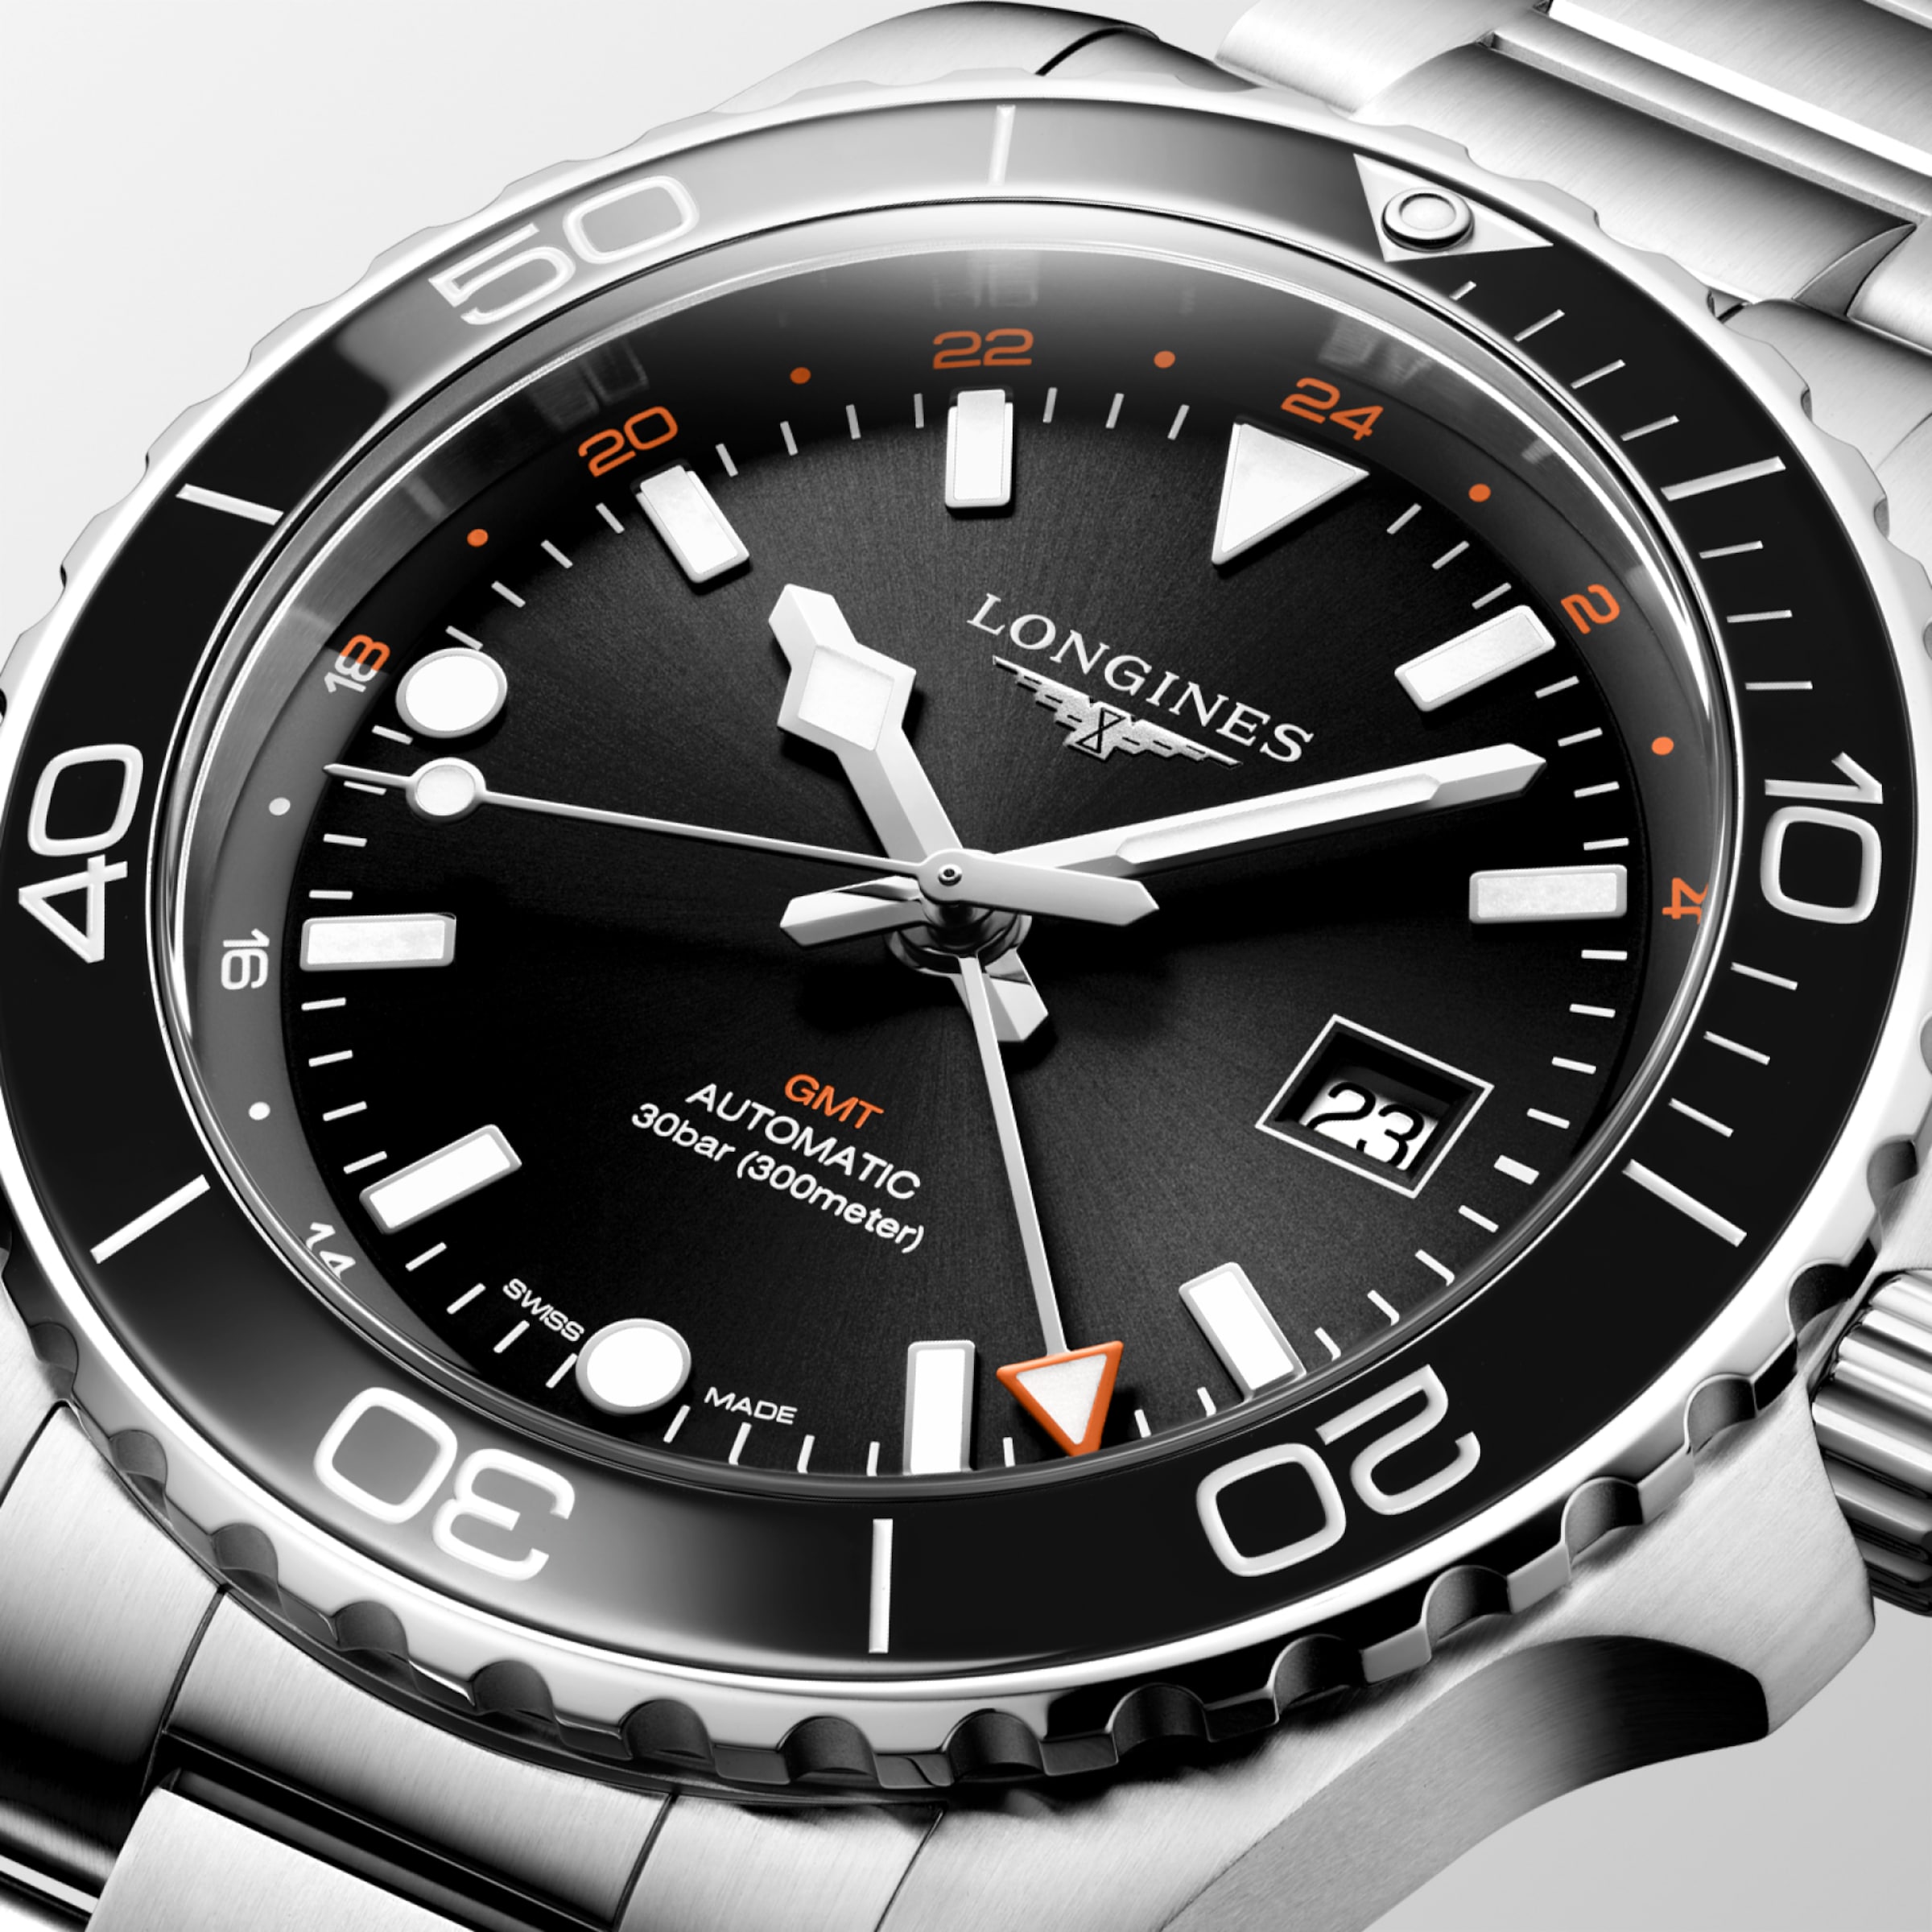 Longines HYDROCONQUEST Automatic Stainless steel and ceramic bezel Watch - L3.890.4.56.6